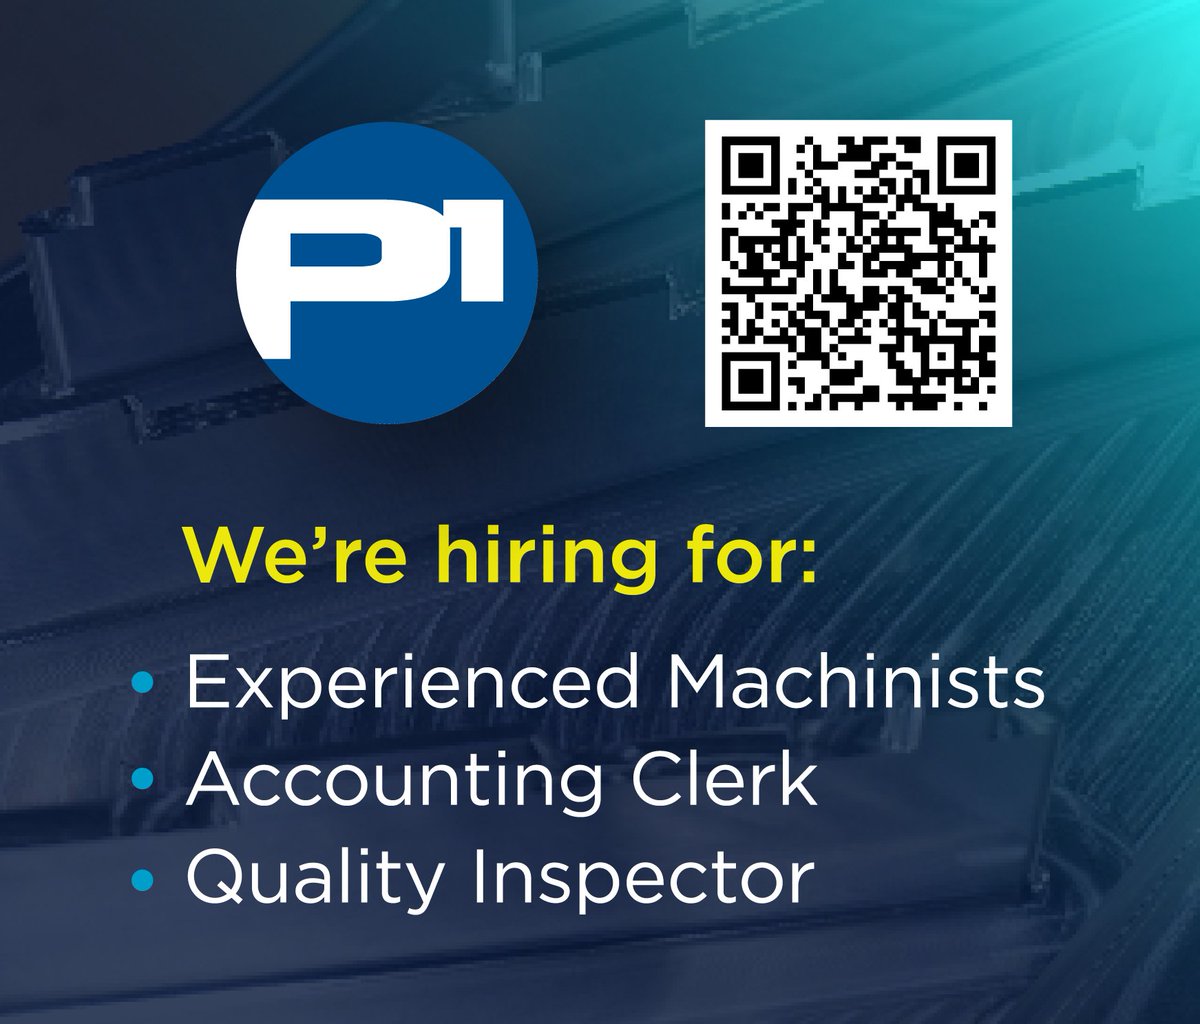 jobs.factoryfix.com/jobs?keyword=+…
We're growing and have several positions available! Join our world class team and begin your career in manufacturing with P1.
#manufacturing #jobs #career #cncmachining